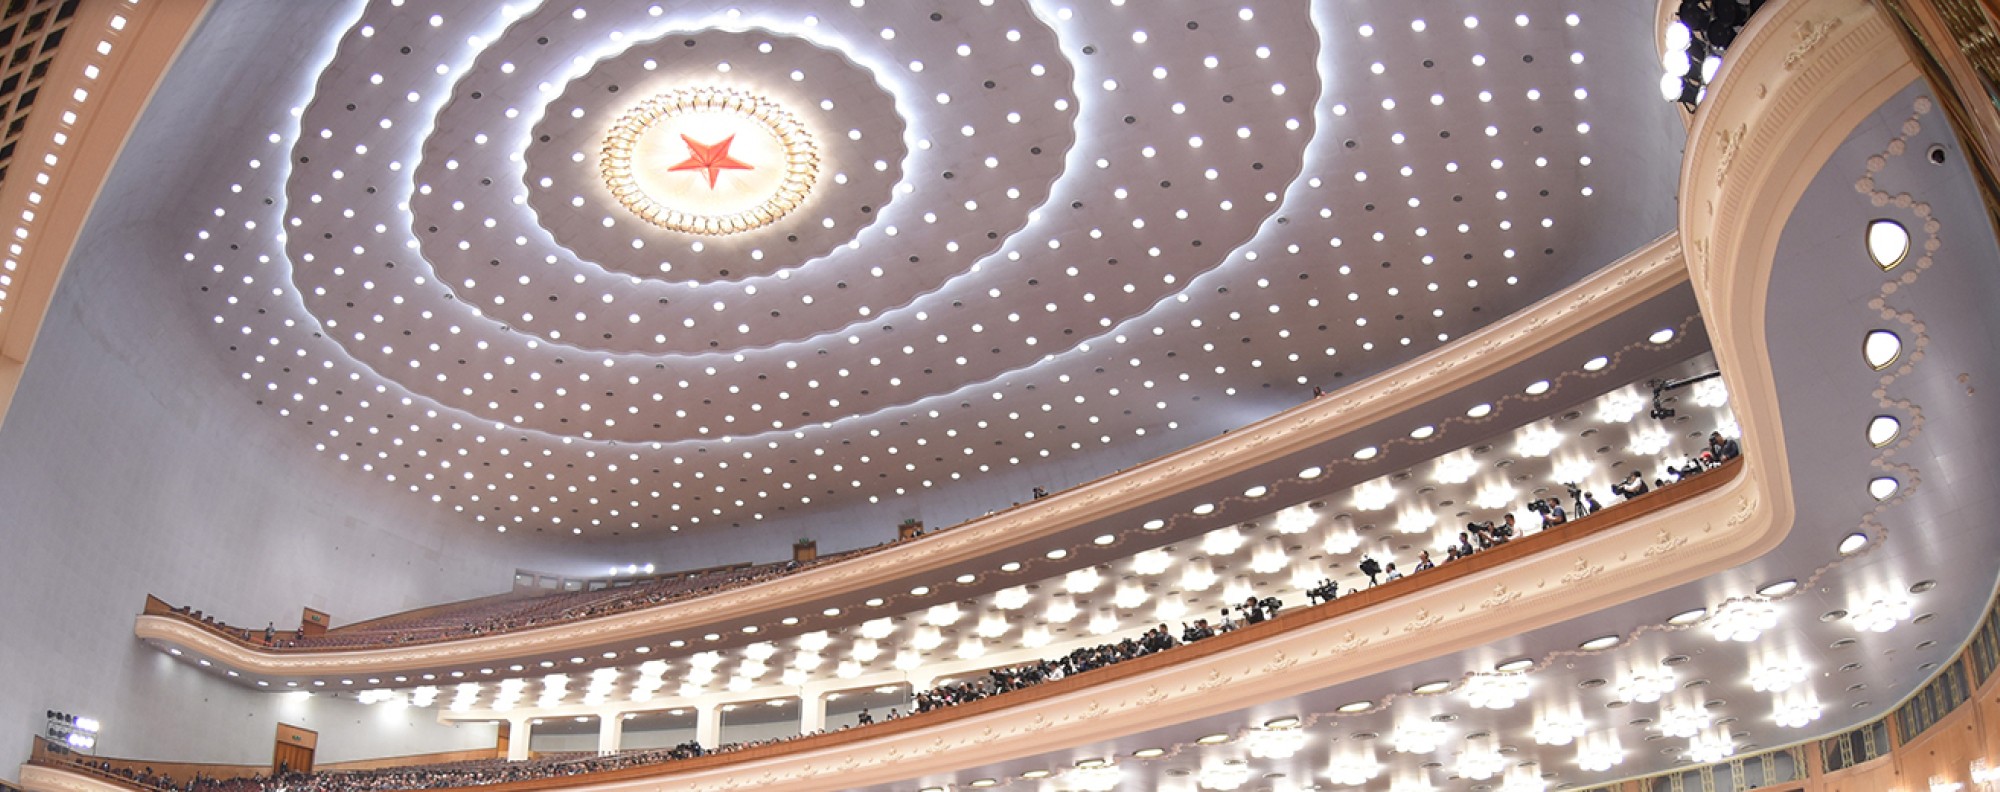 The Great Hall of the People in Beijing. Photo: Xinhua